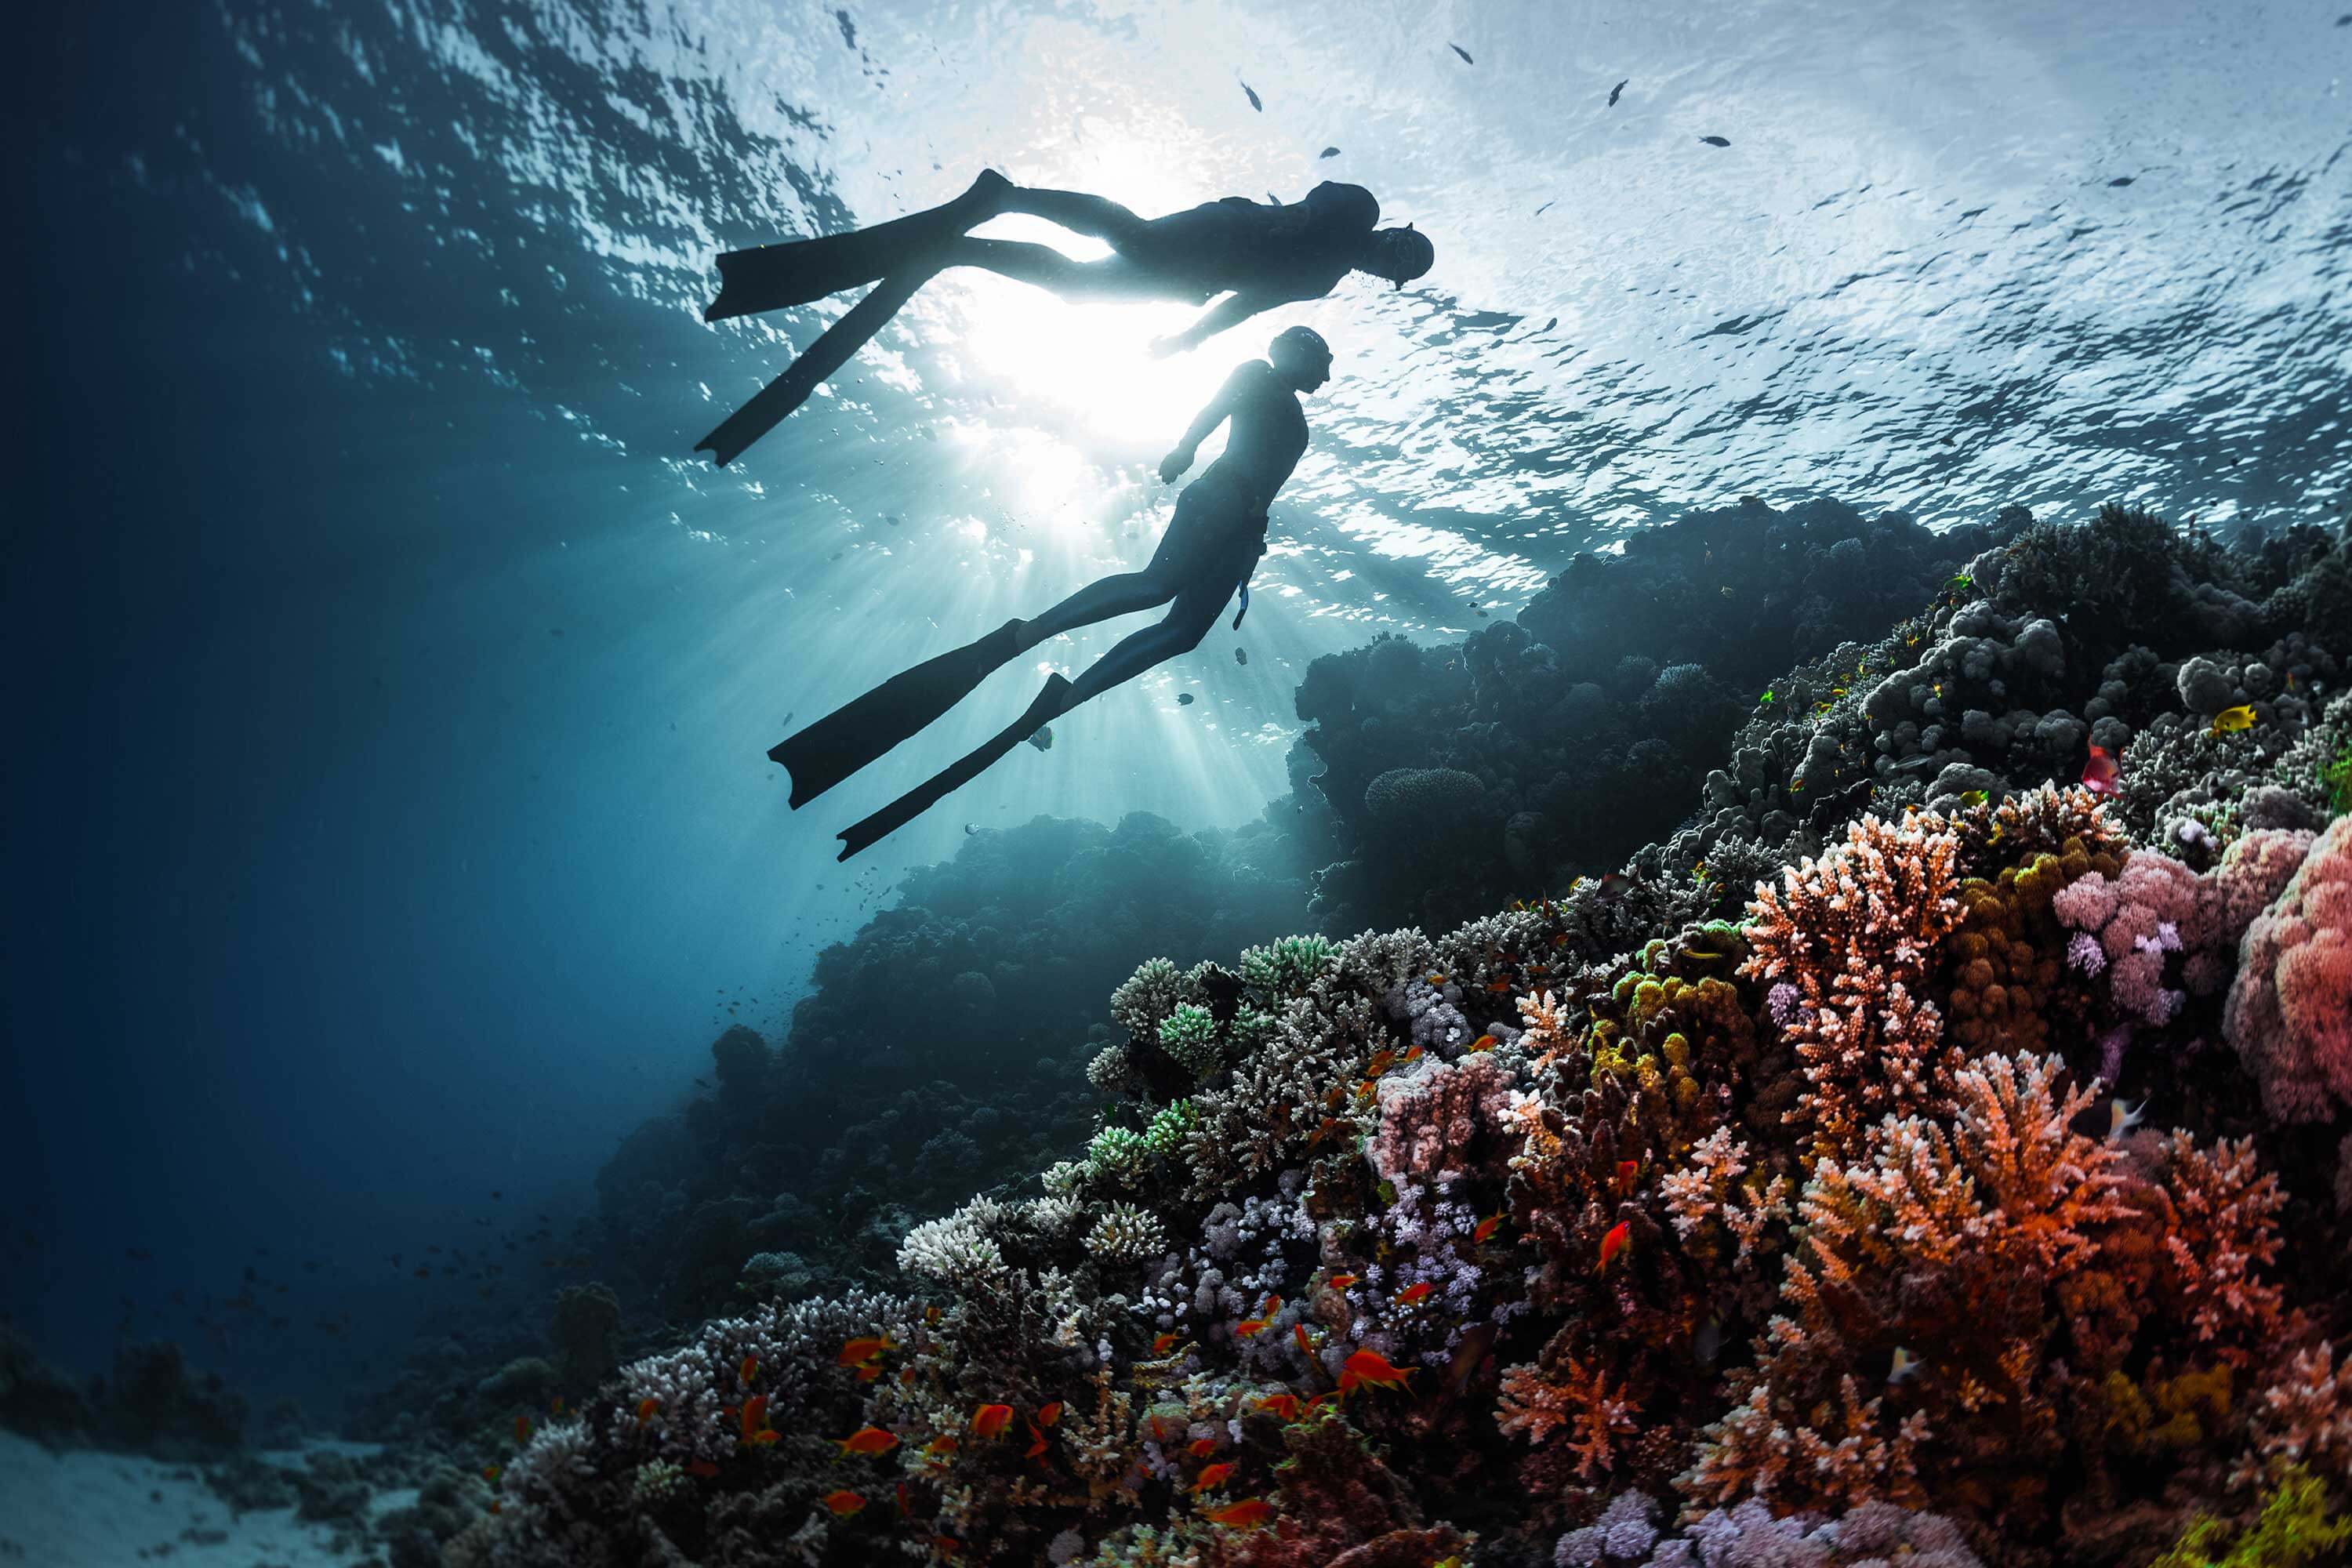  Two people are under water looking at coral reef